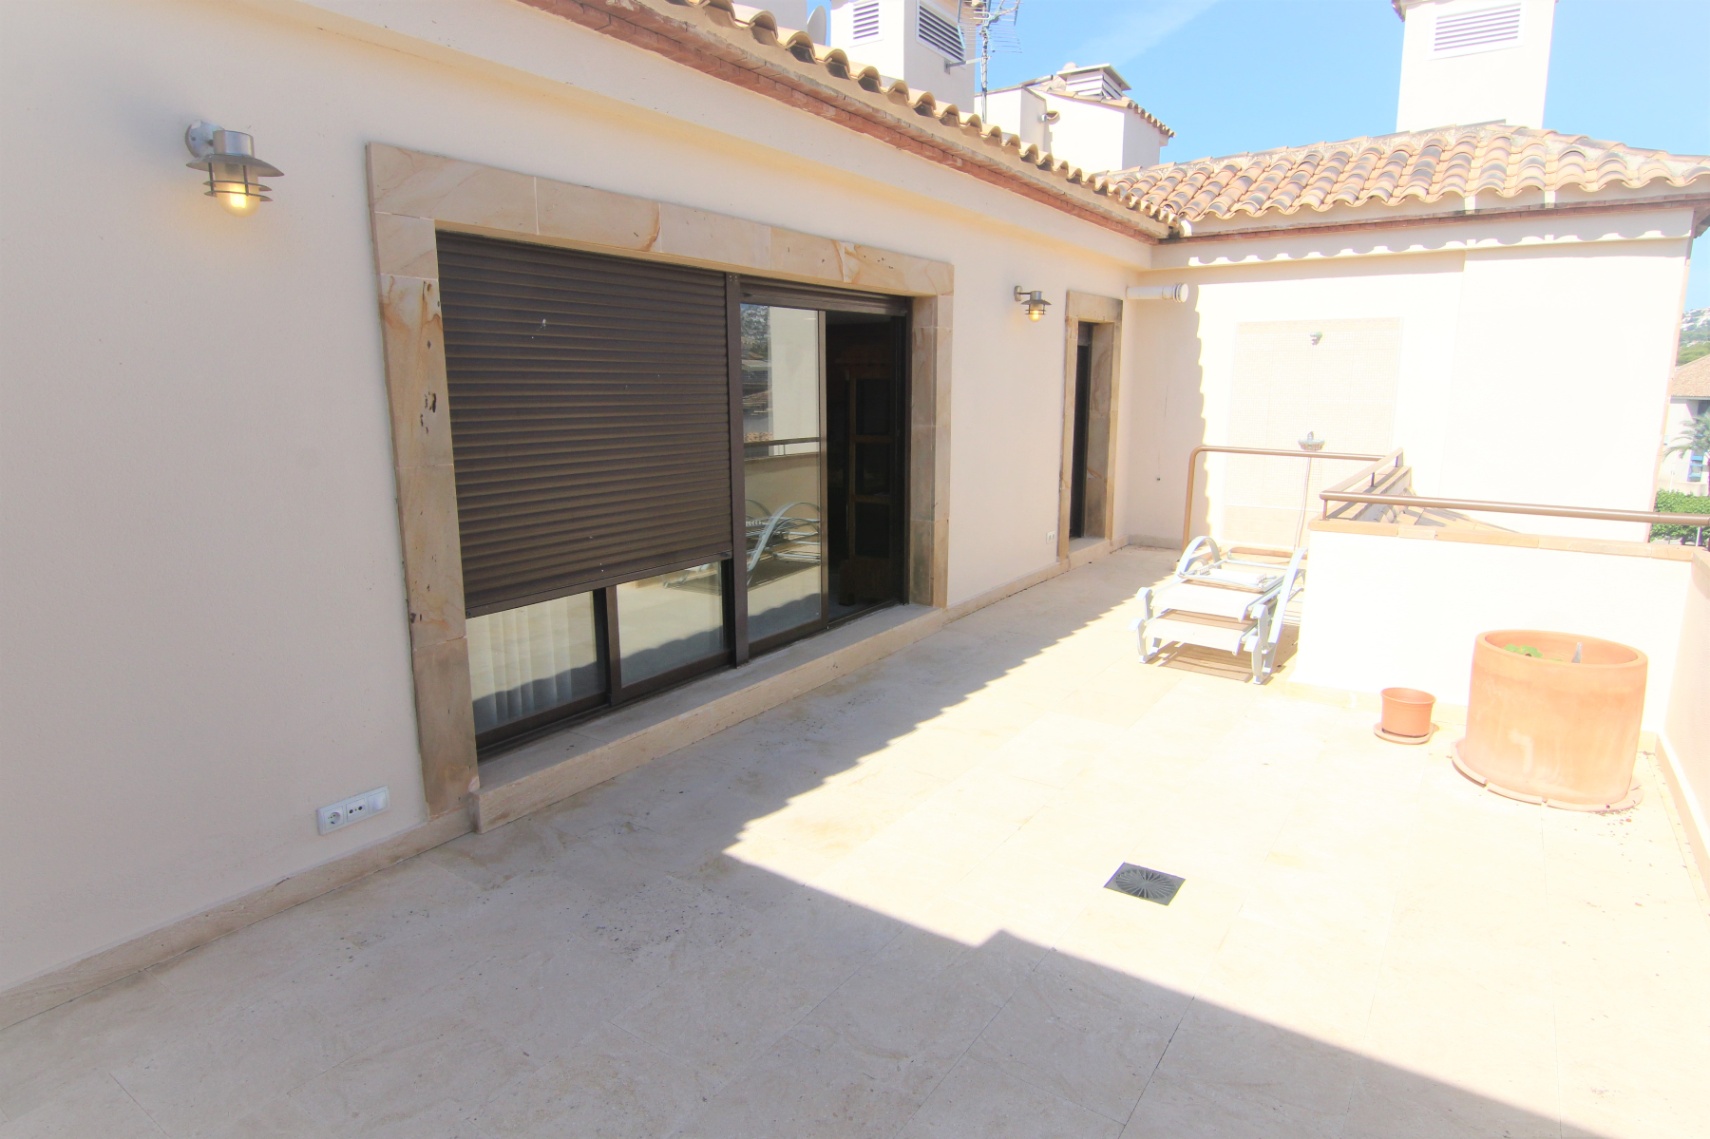 Luxury penthouse for sale with large terraces in Moraira.